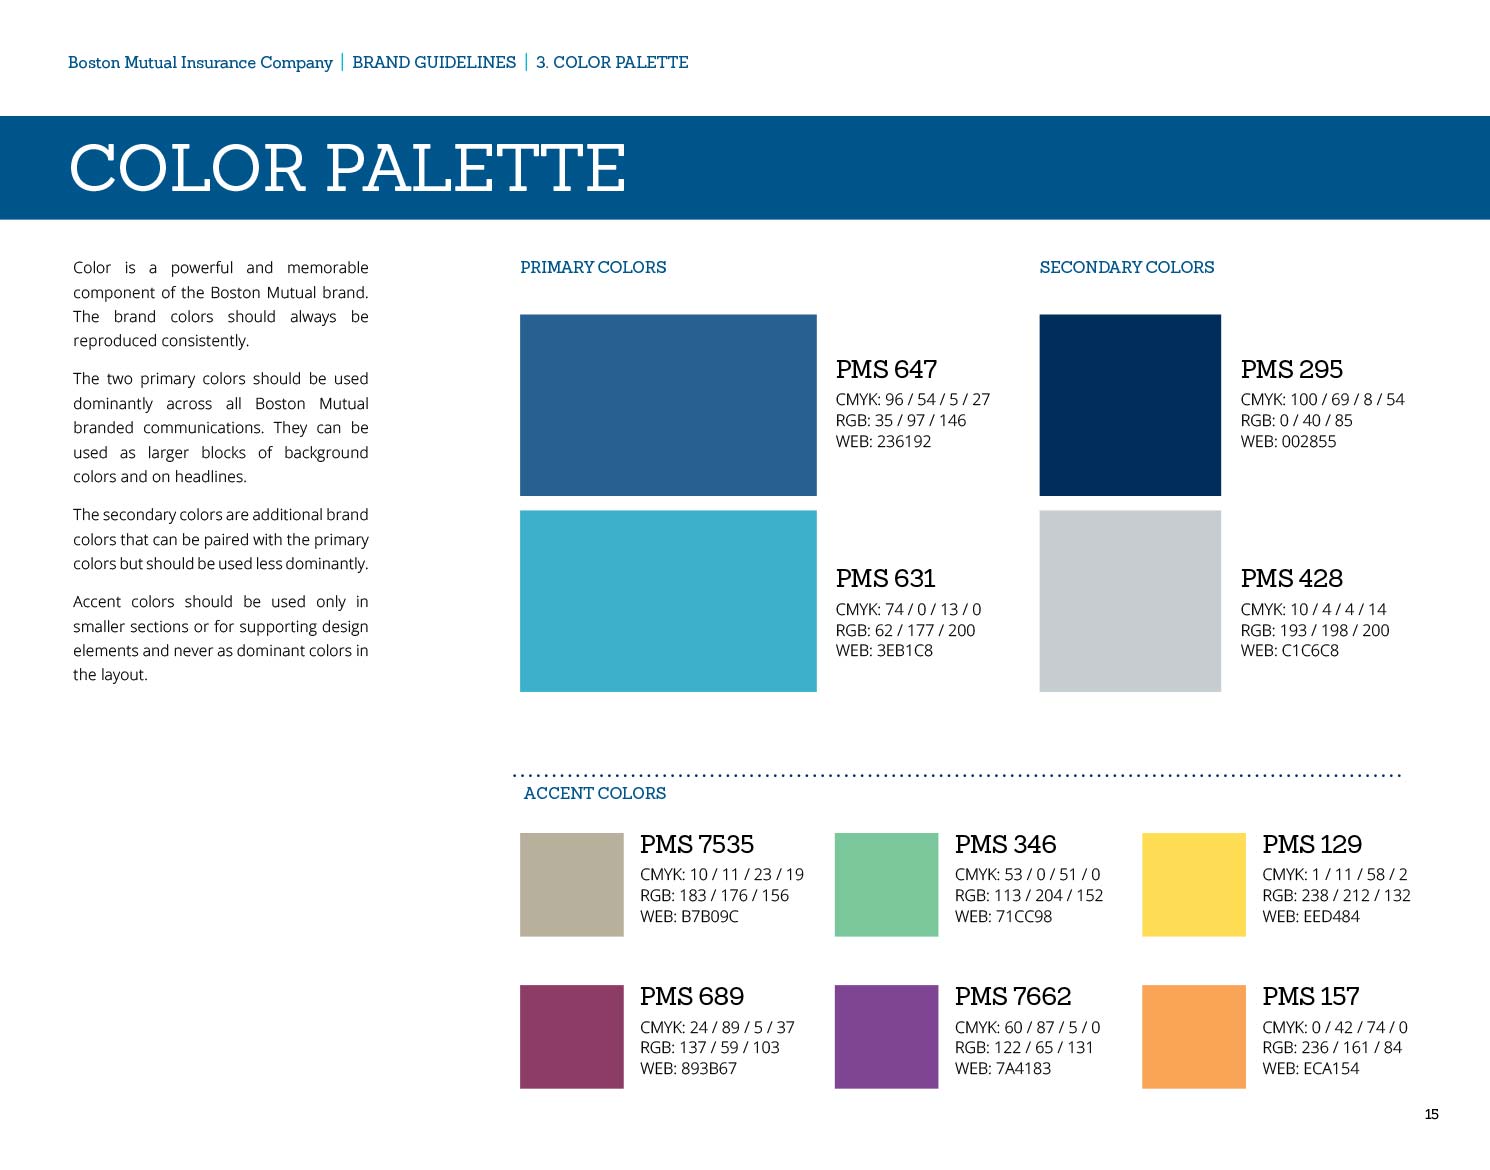 boston mutual brand guide page showing color palette